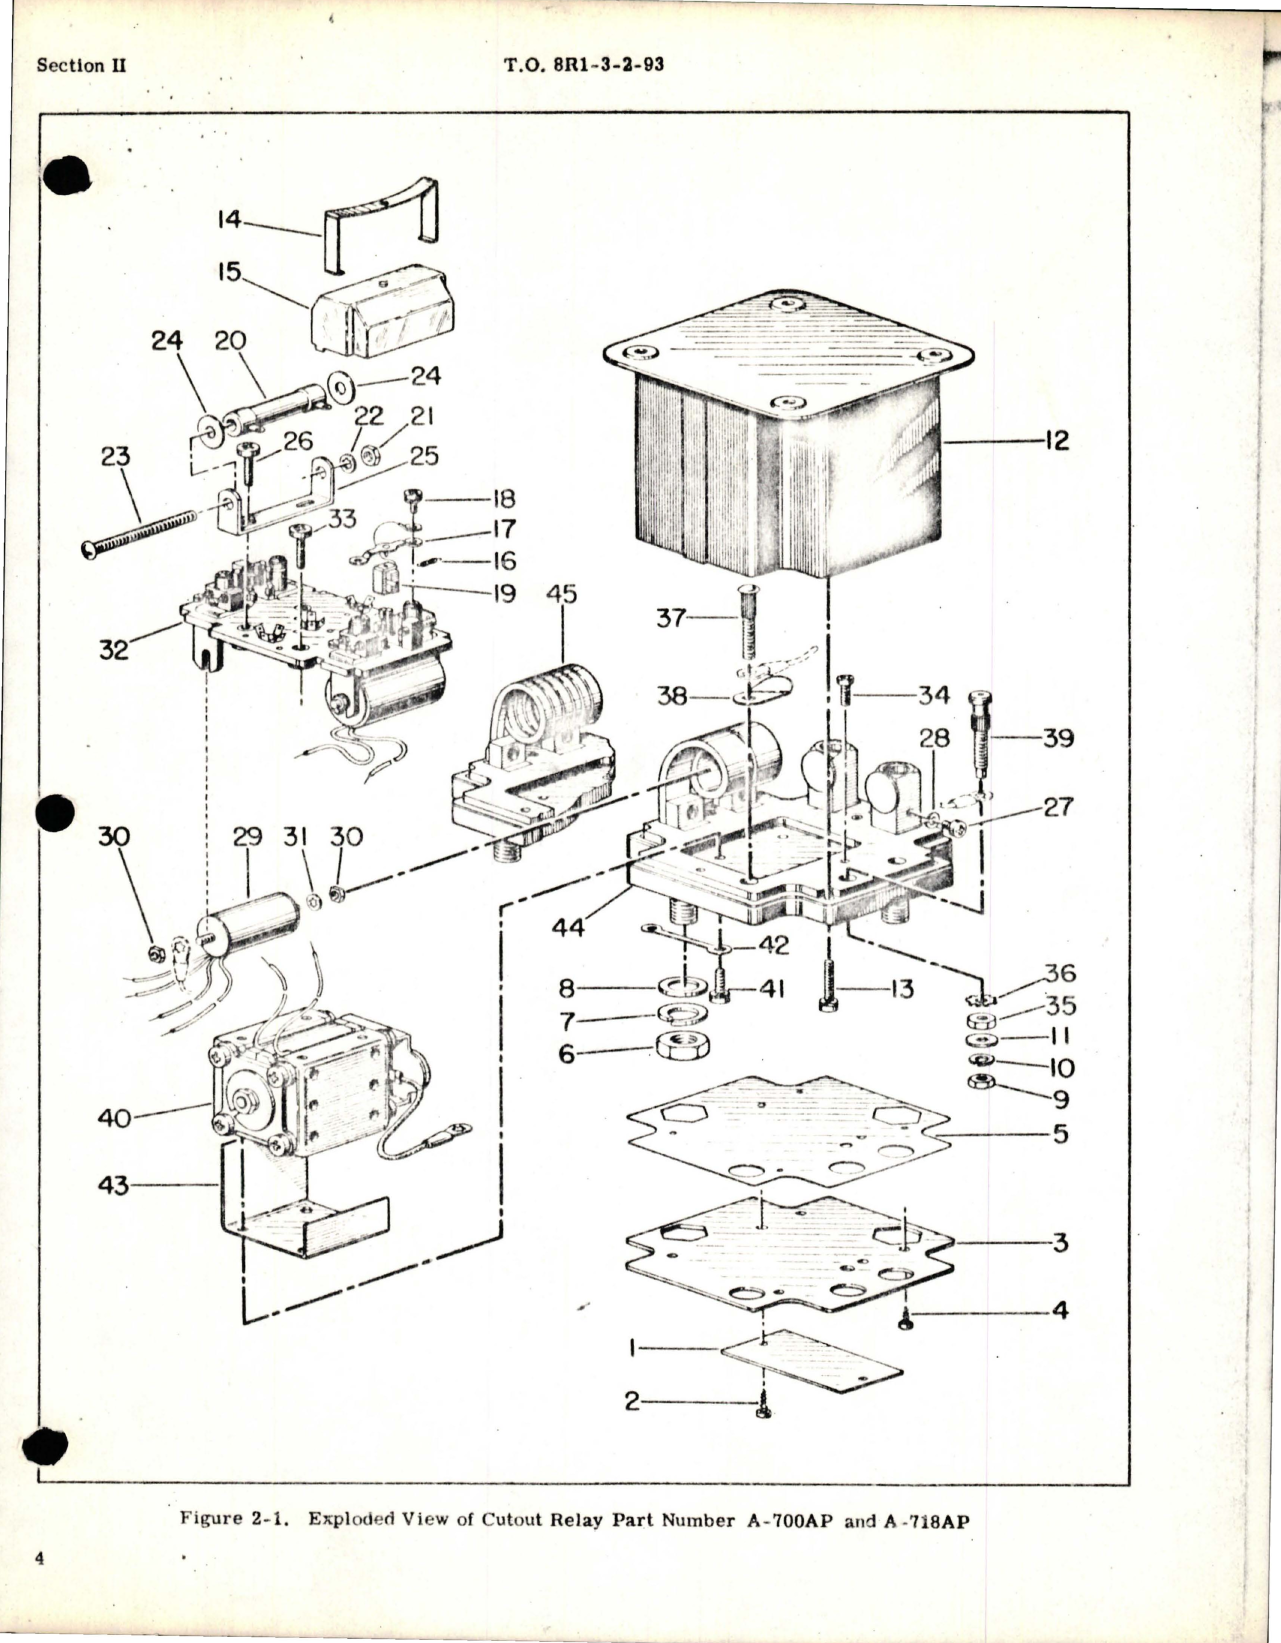 Sample page 7 from AirCorps Library document: Overhaul Instructions for Reverse Current Cutout Relay - Parts A-700AP and A-718AP